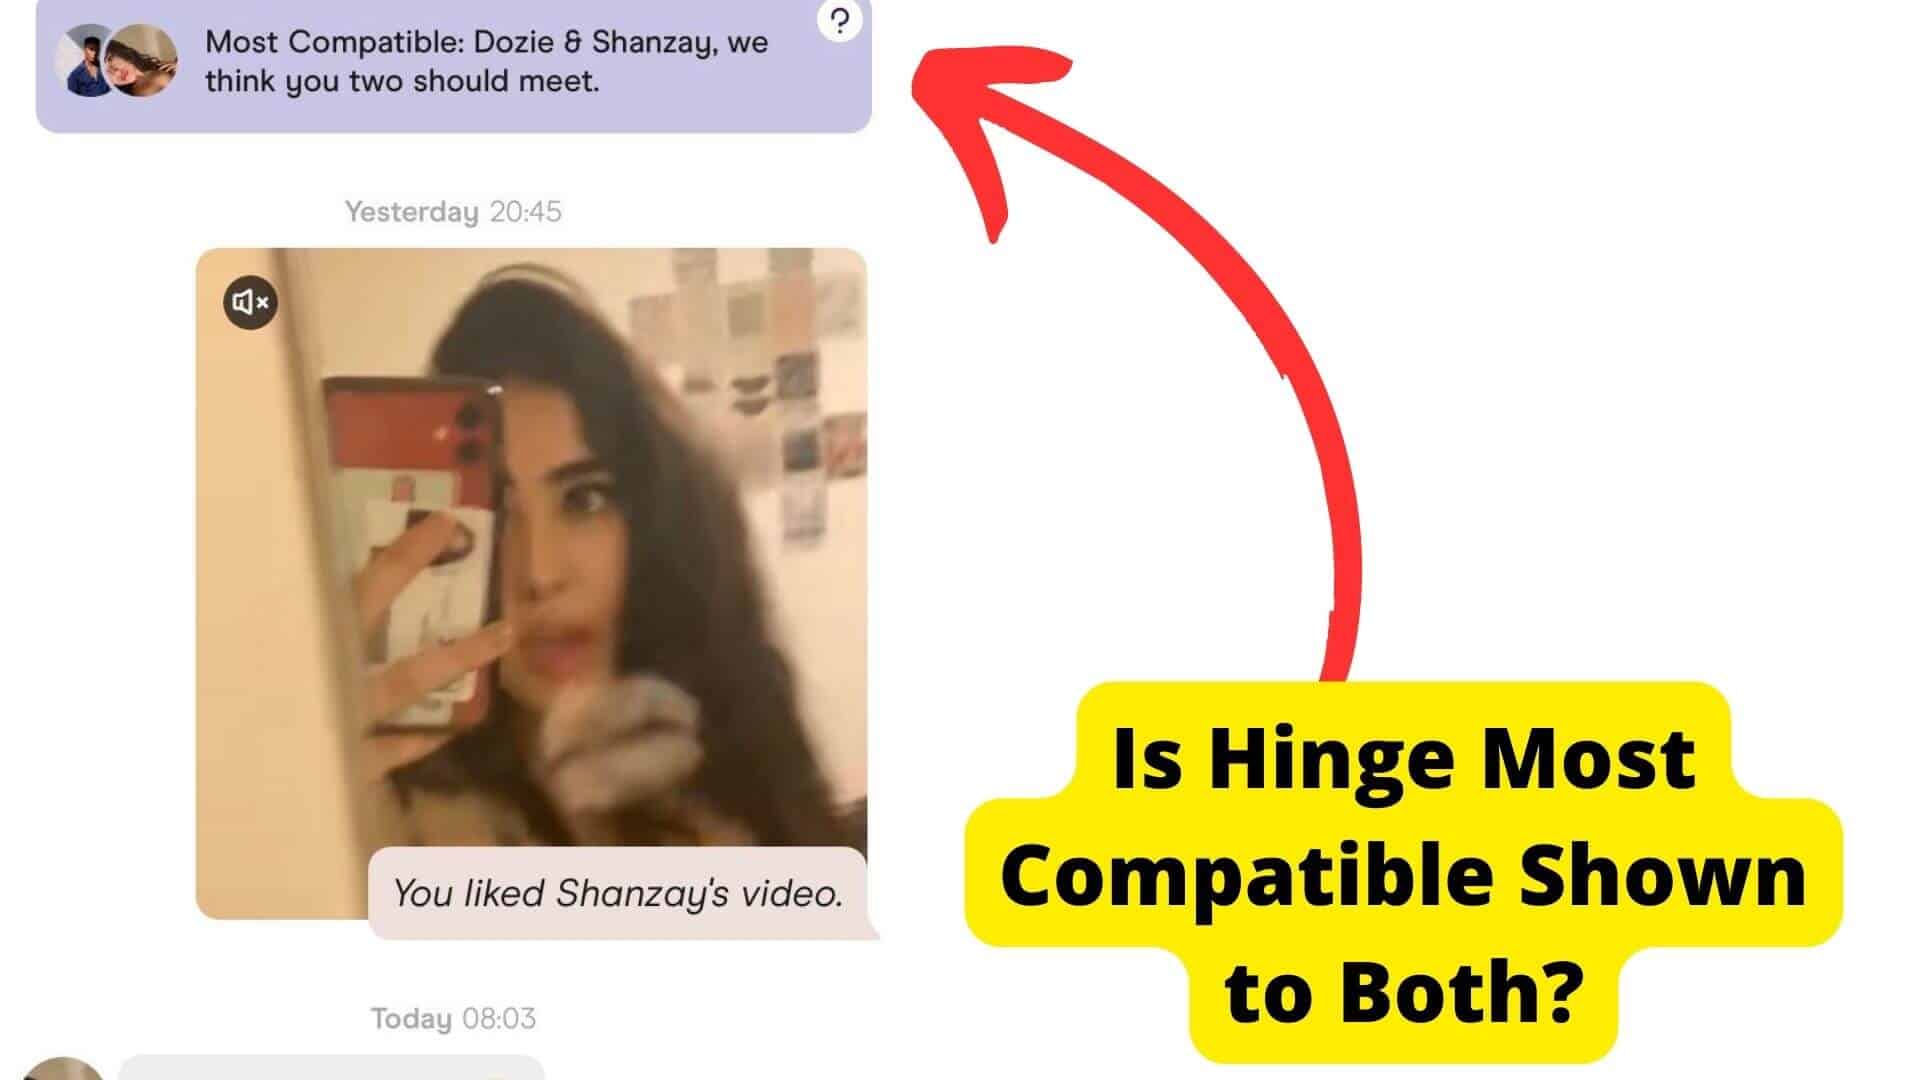 hinge most compatible shown to both